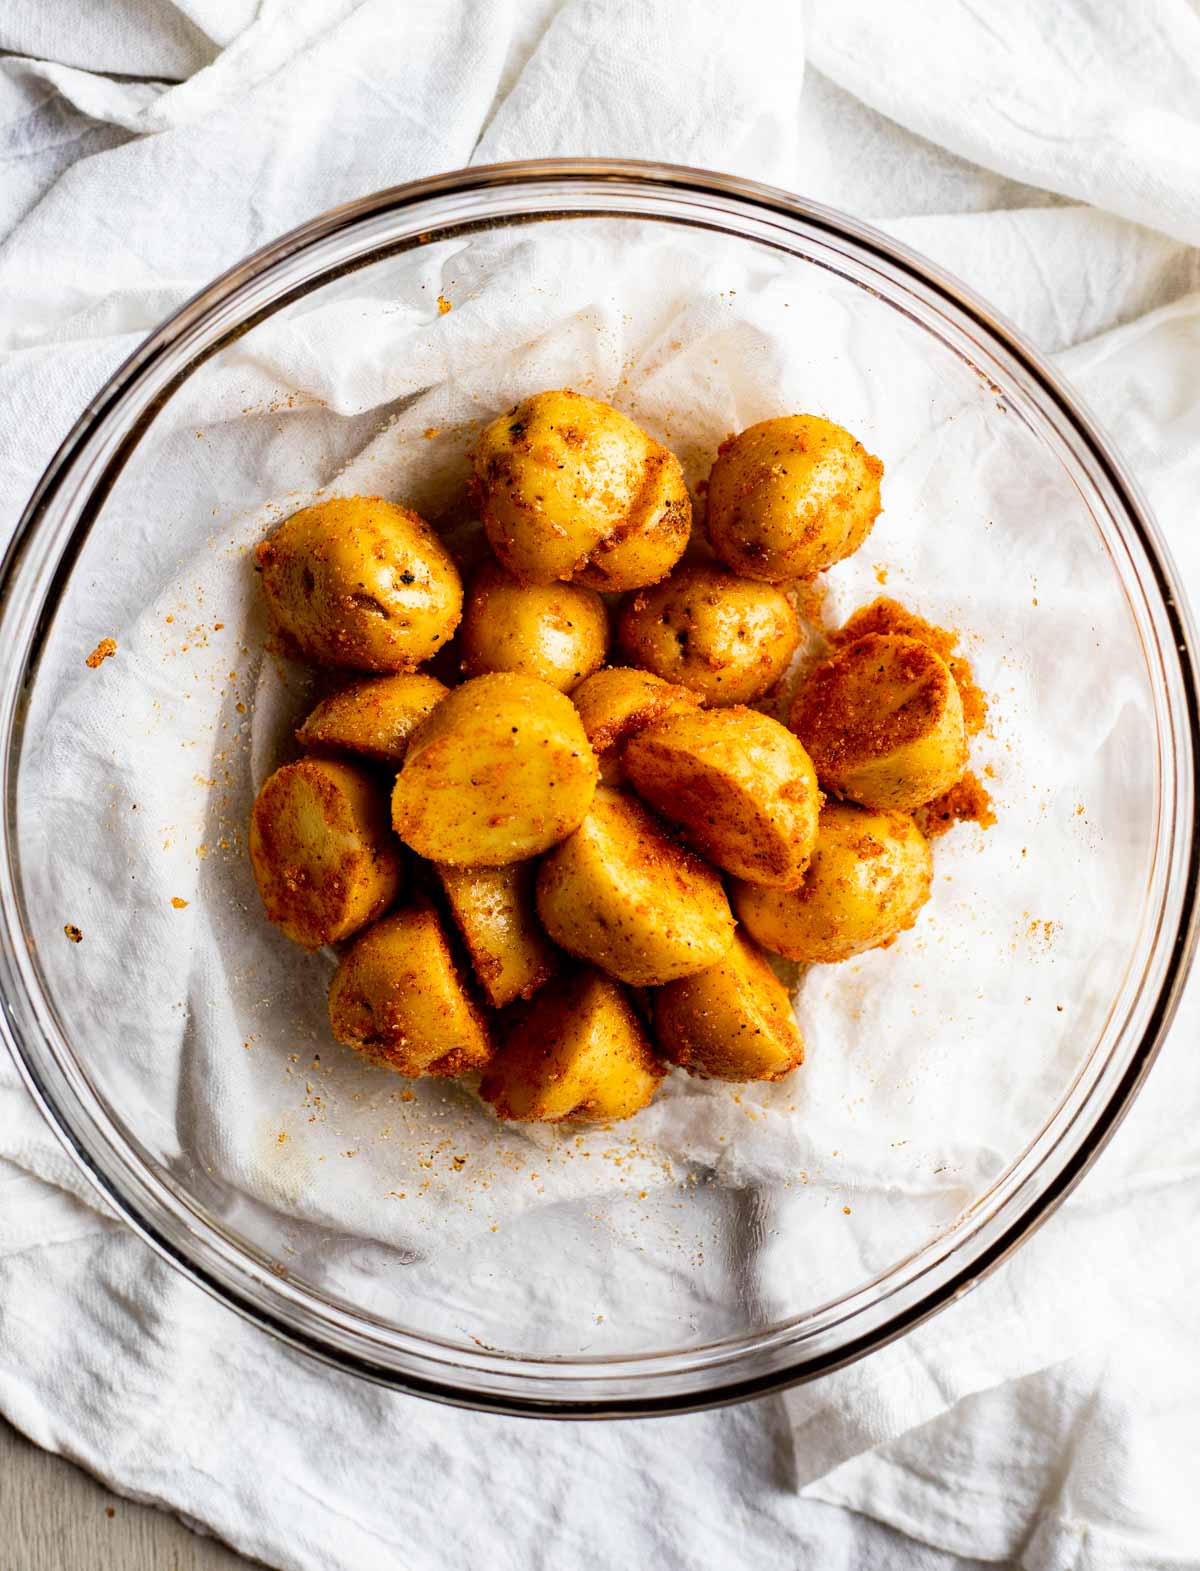 Mini potatoes cut in half and seasoned in a glass bowl on top of a white cloth.